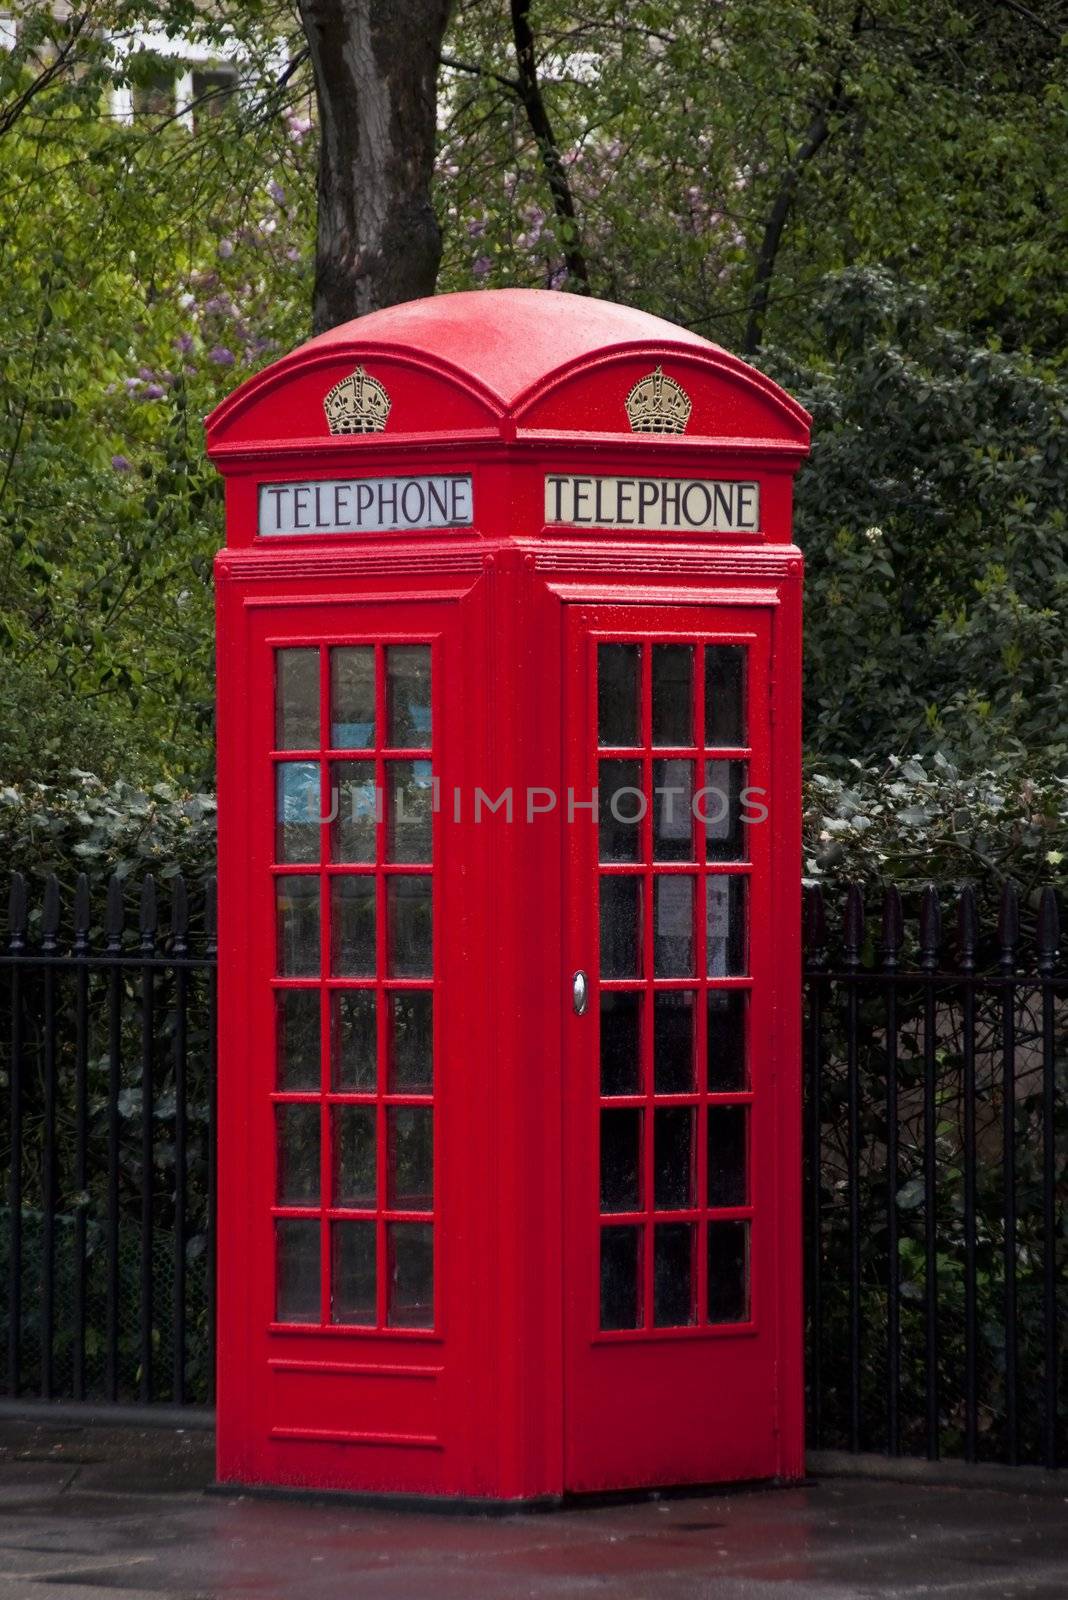 A traditional red telephone (K2 model) in London, England, UK